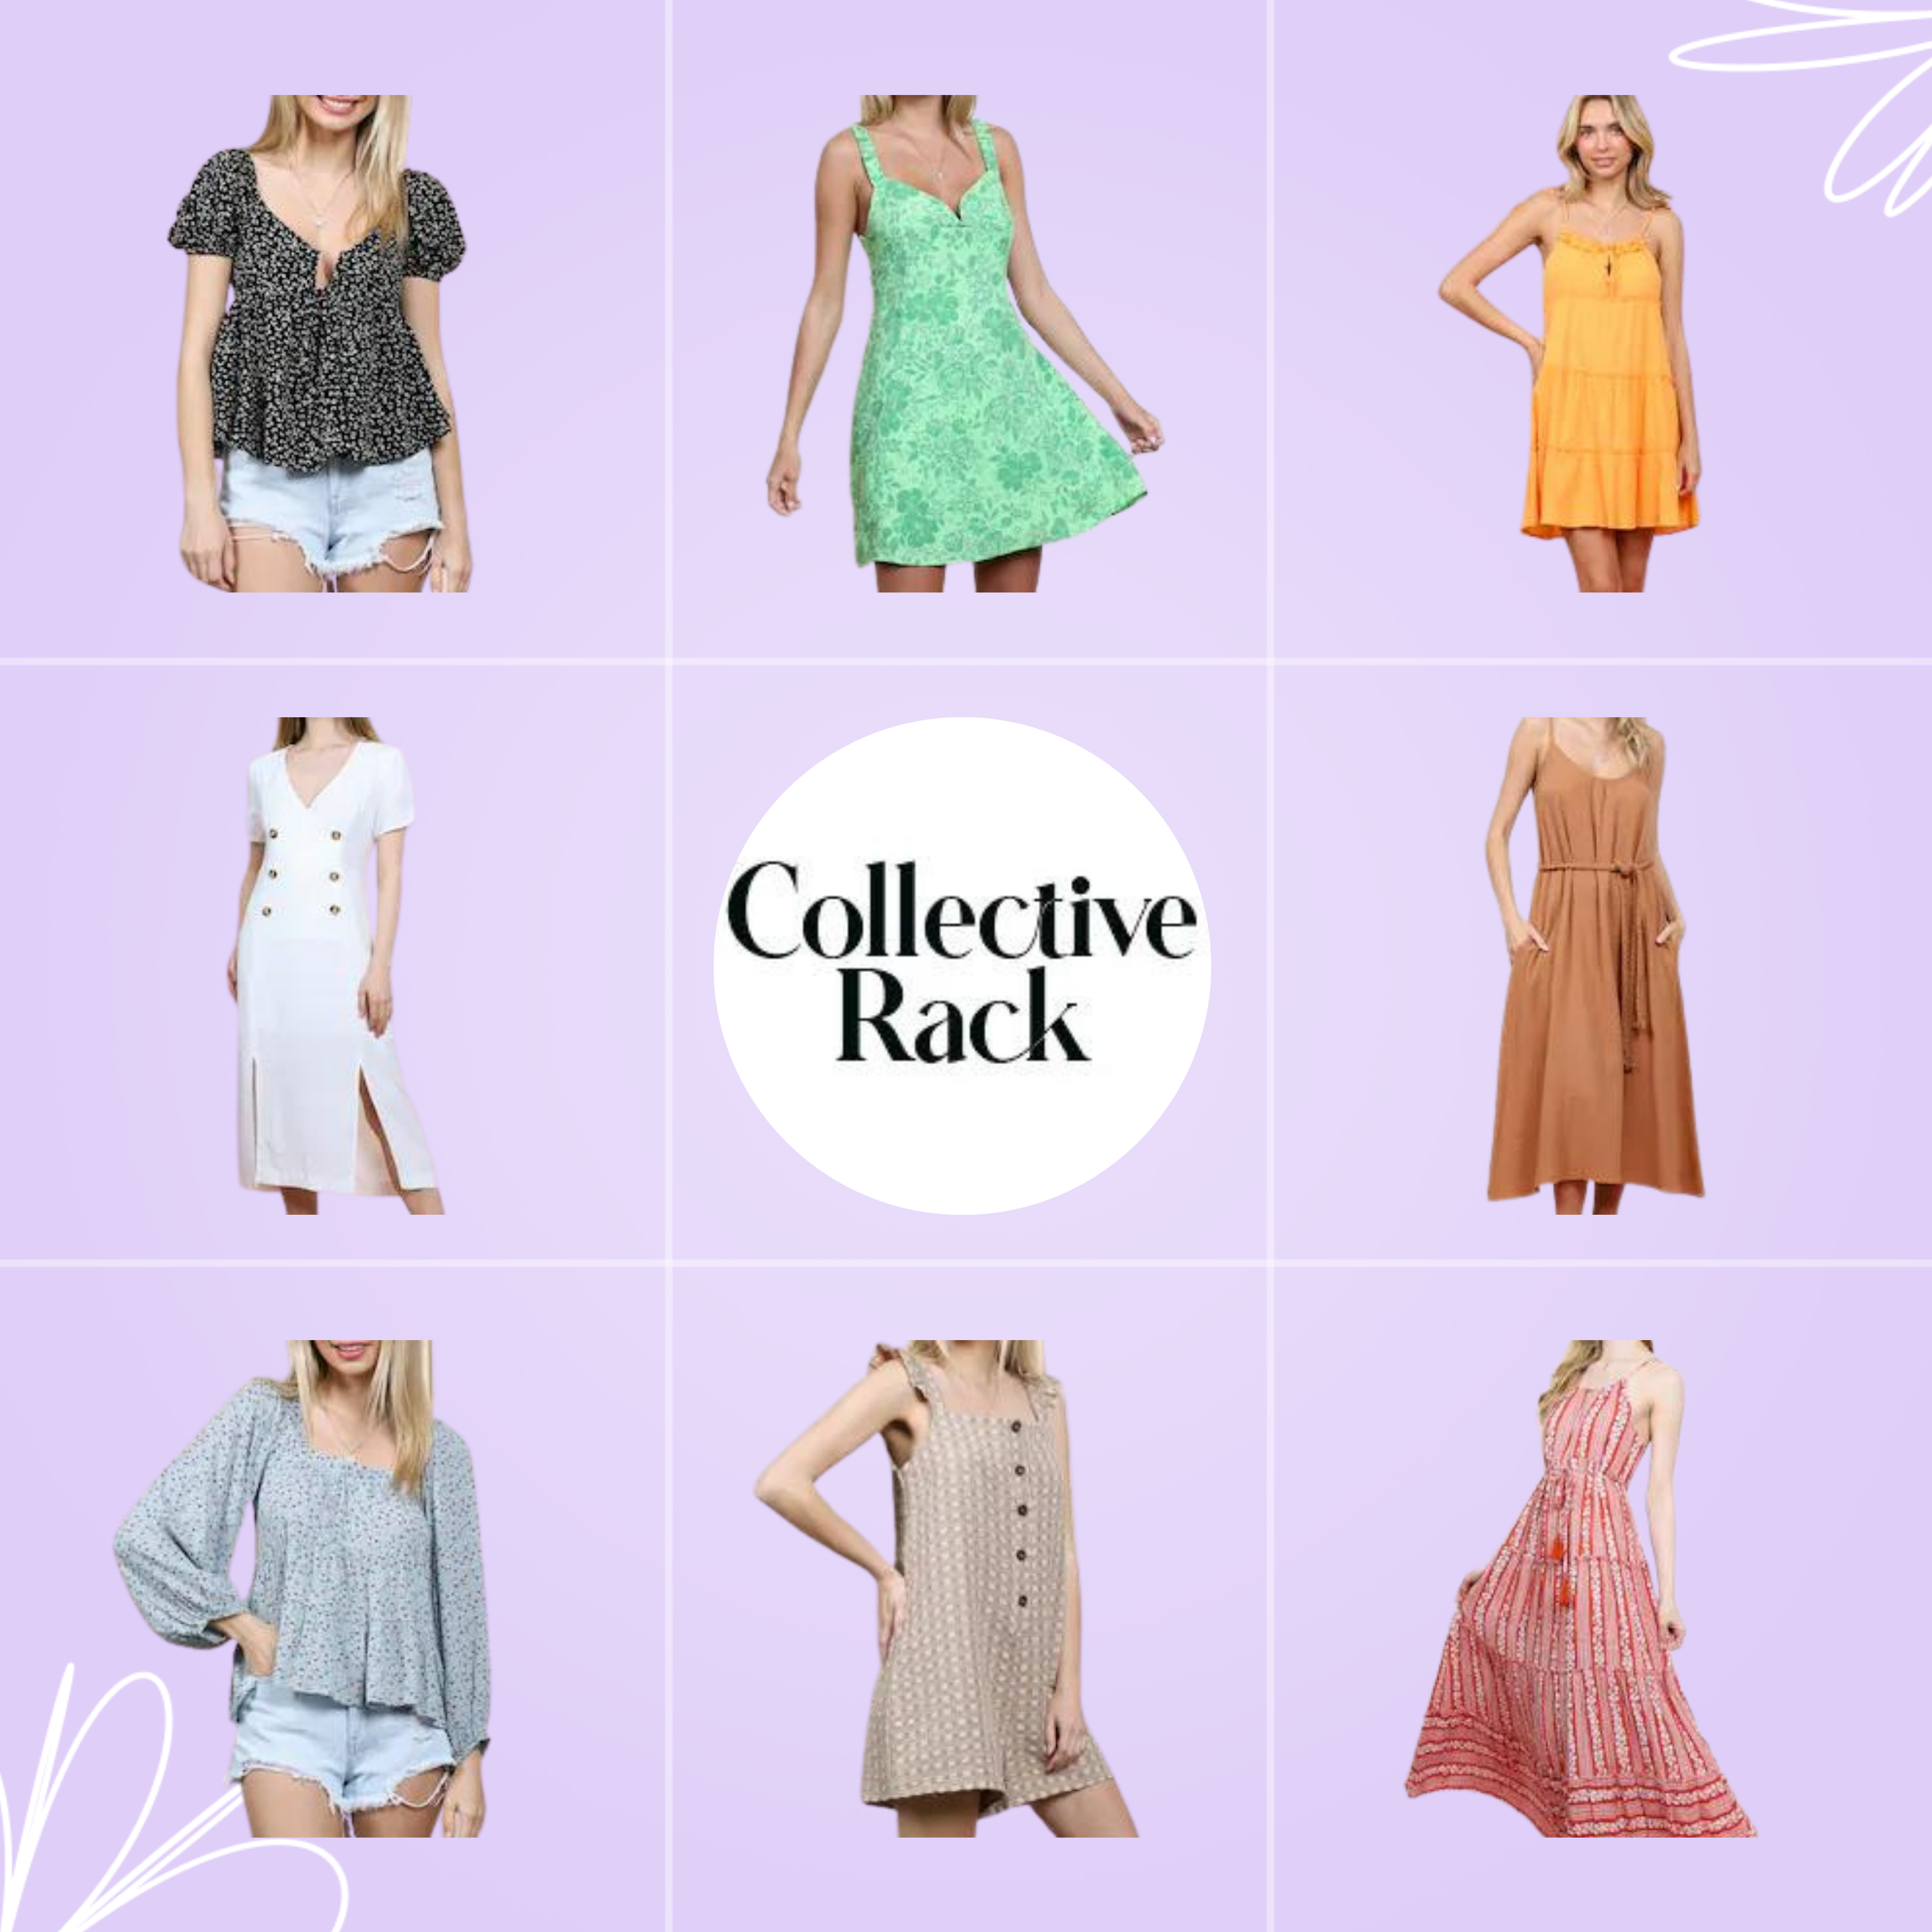 Brand image for Collective Rack